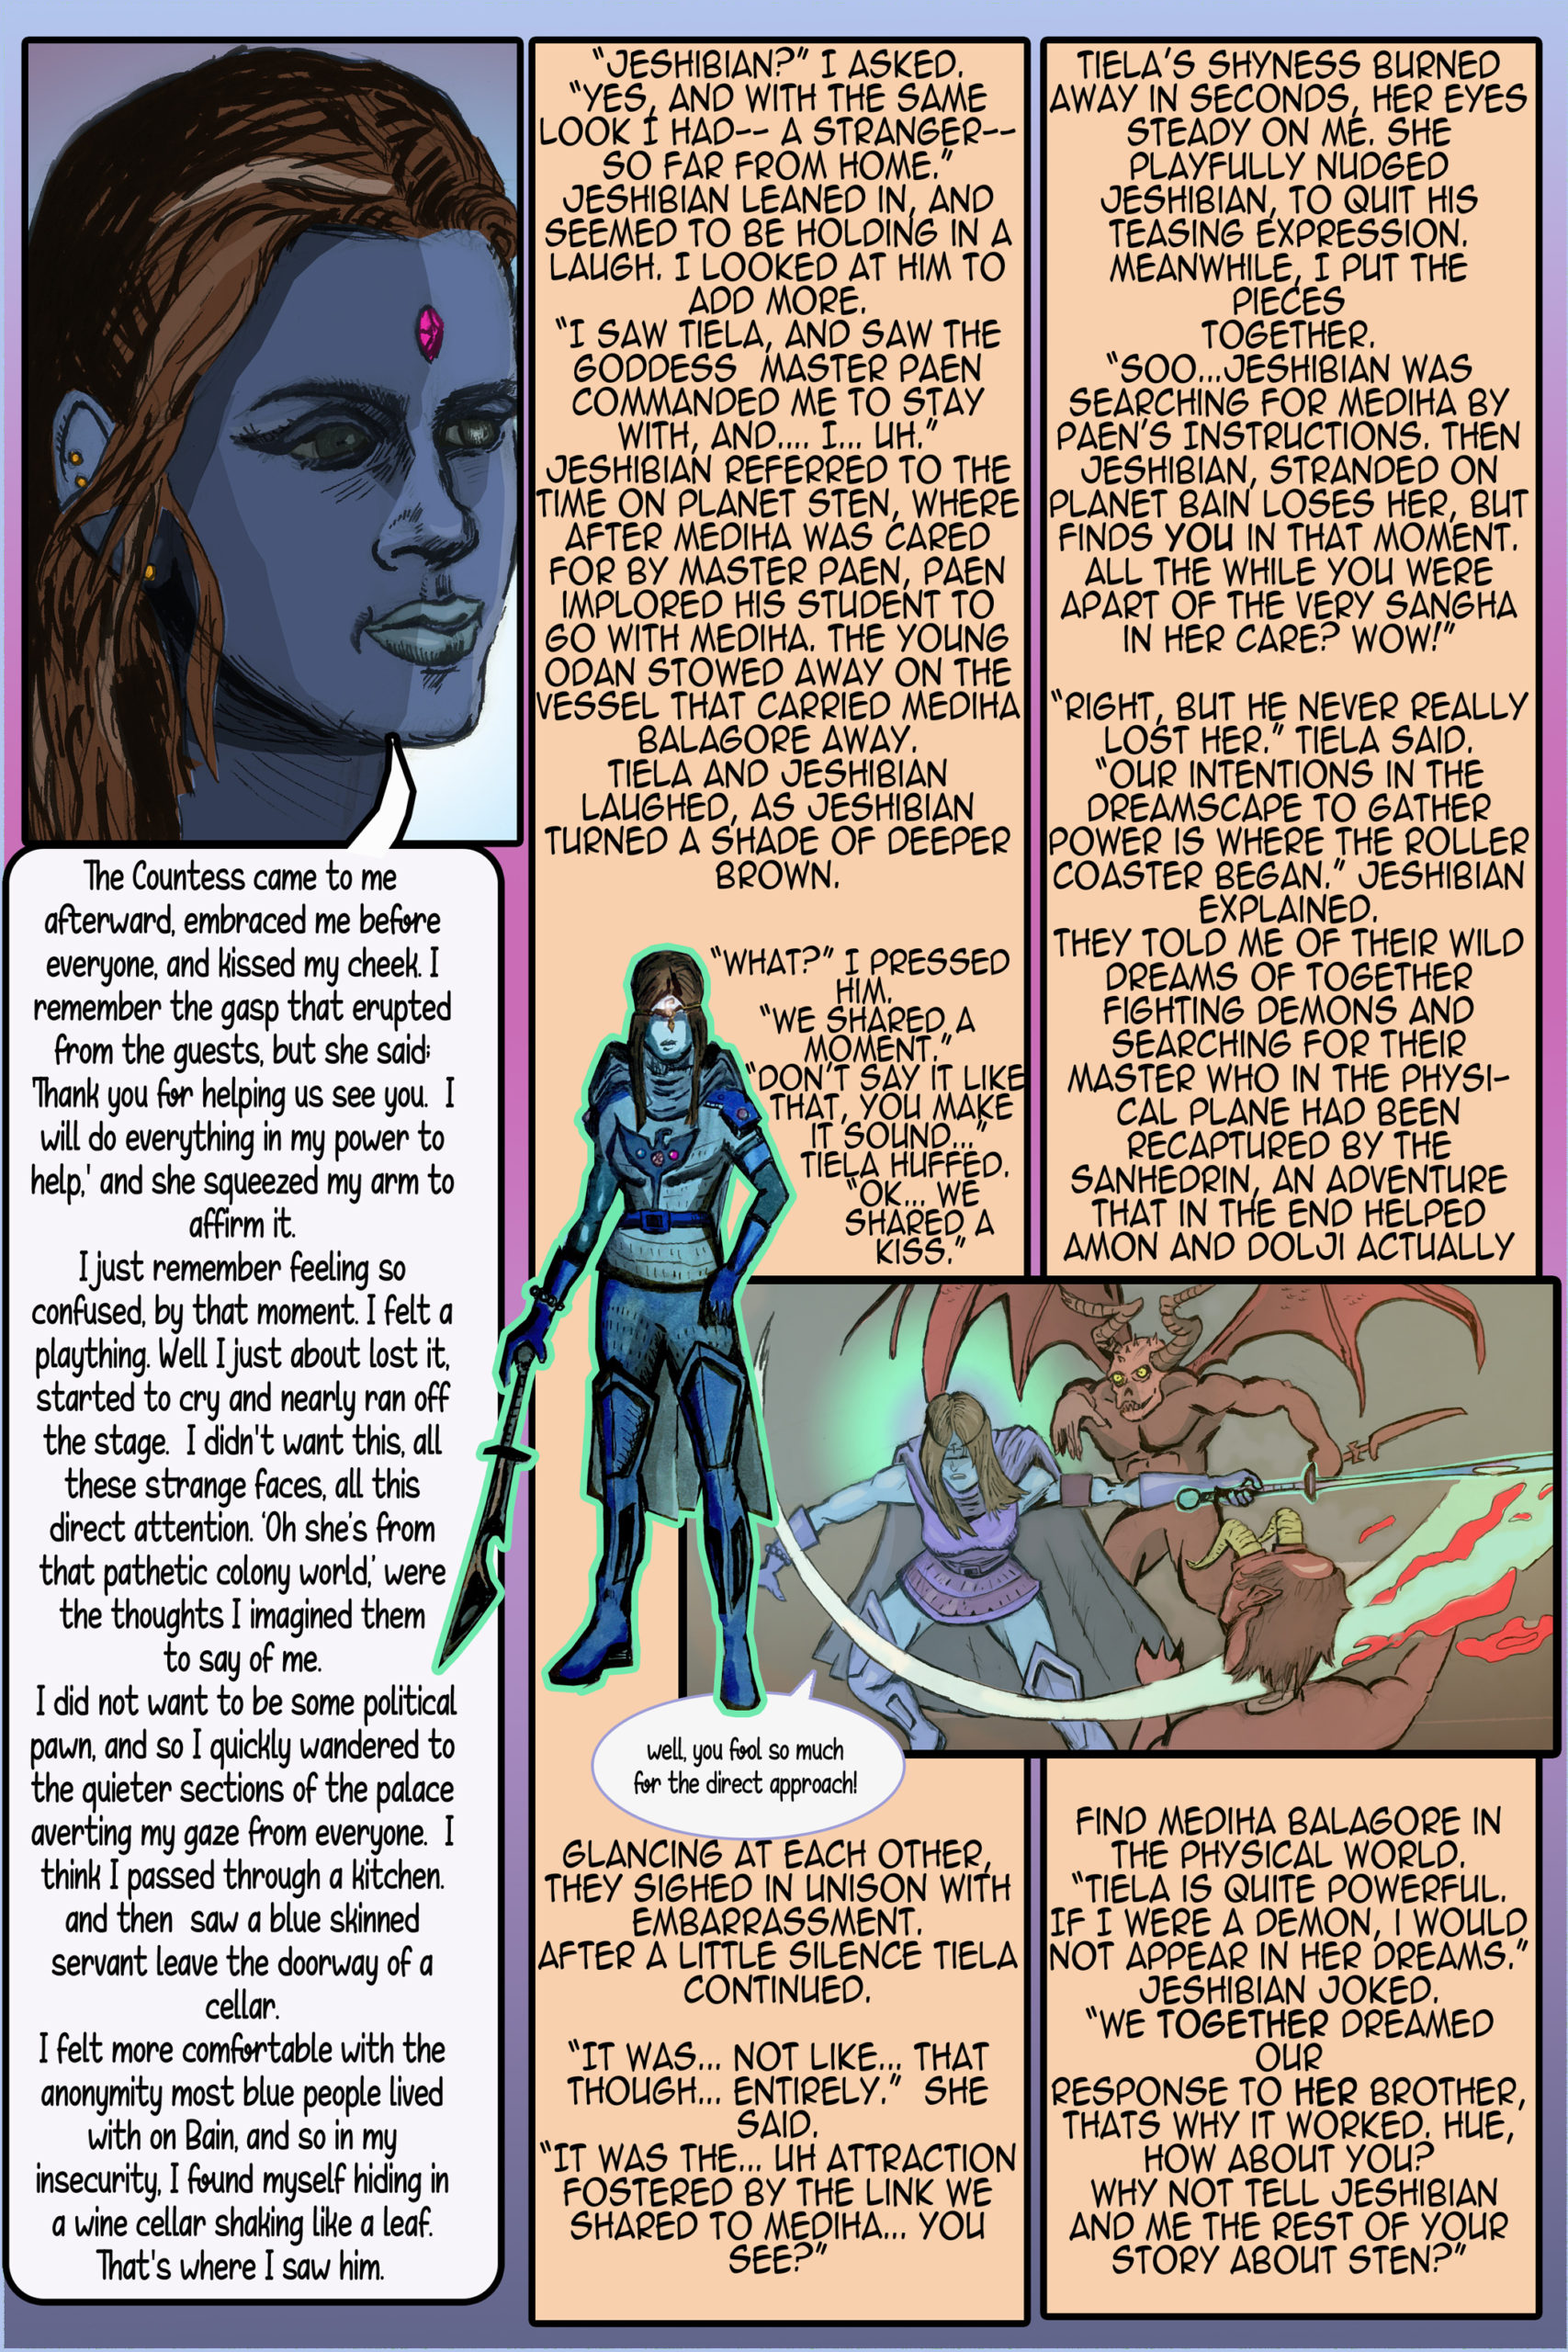 The Goddess of The Sister Worlds – Page 27 –